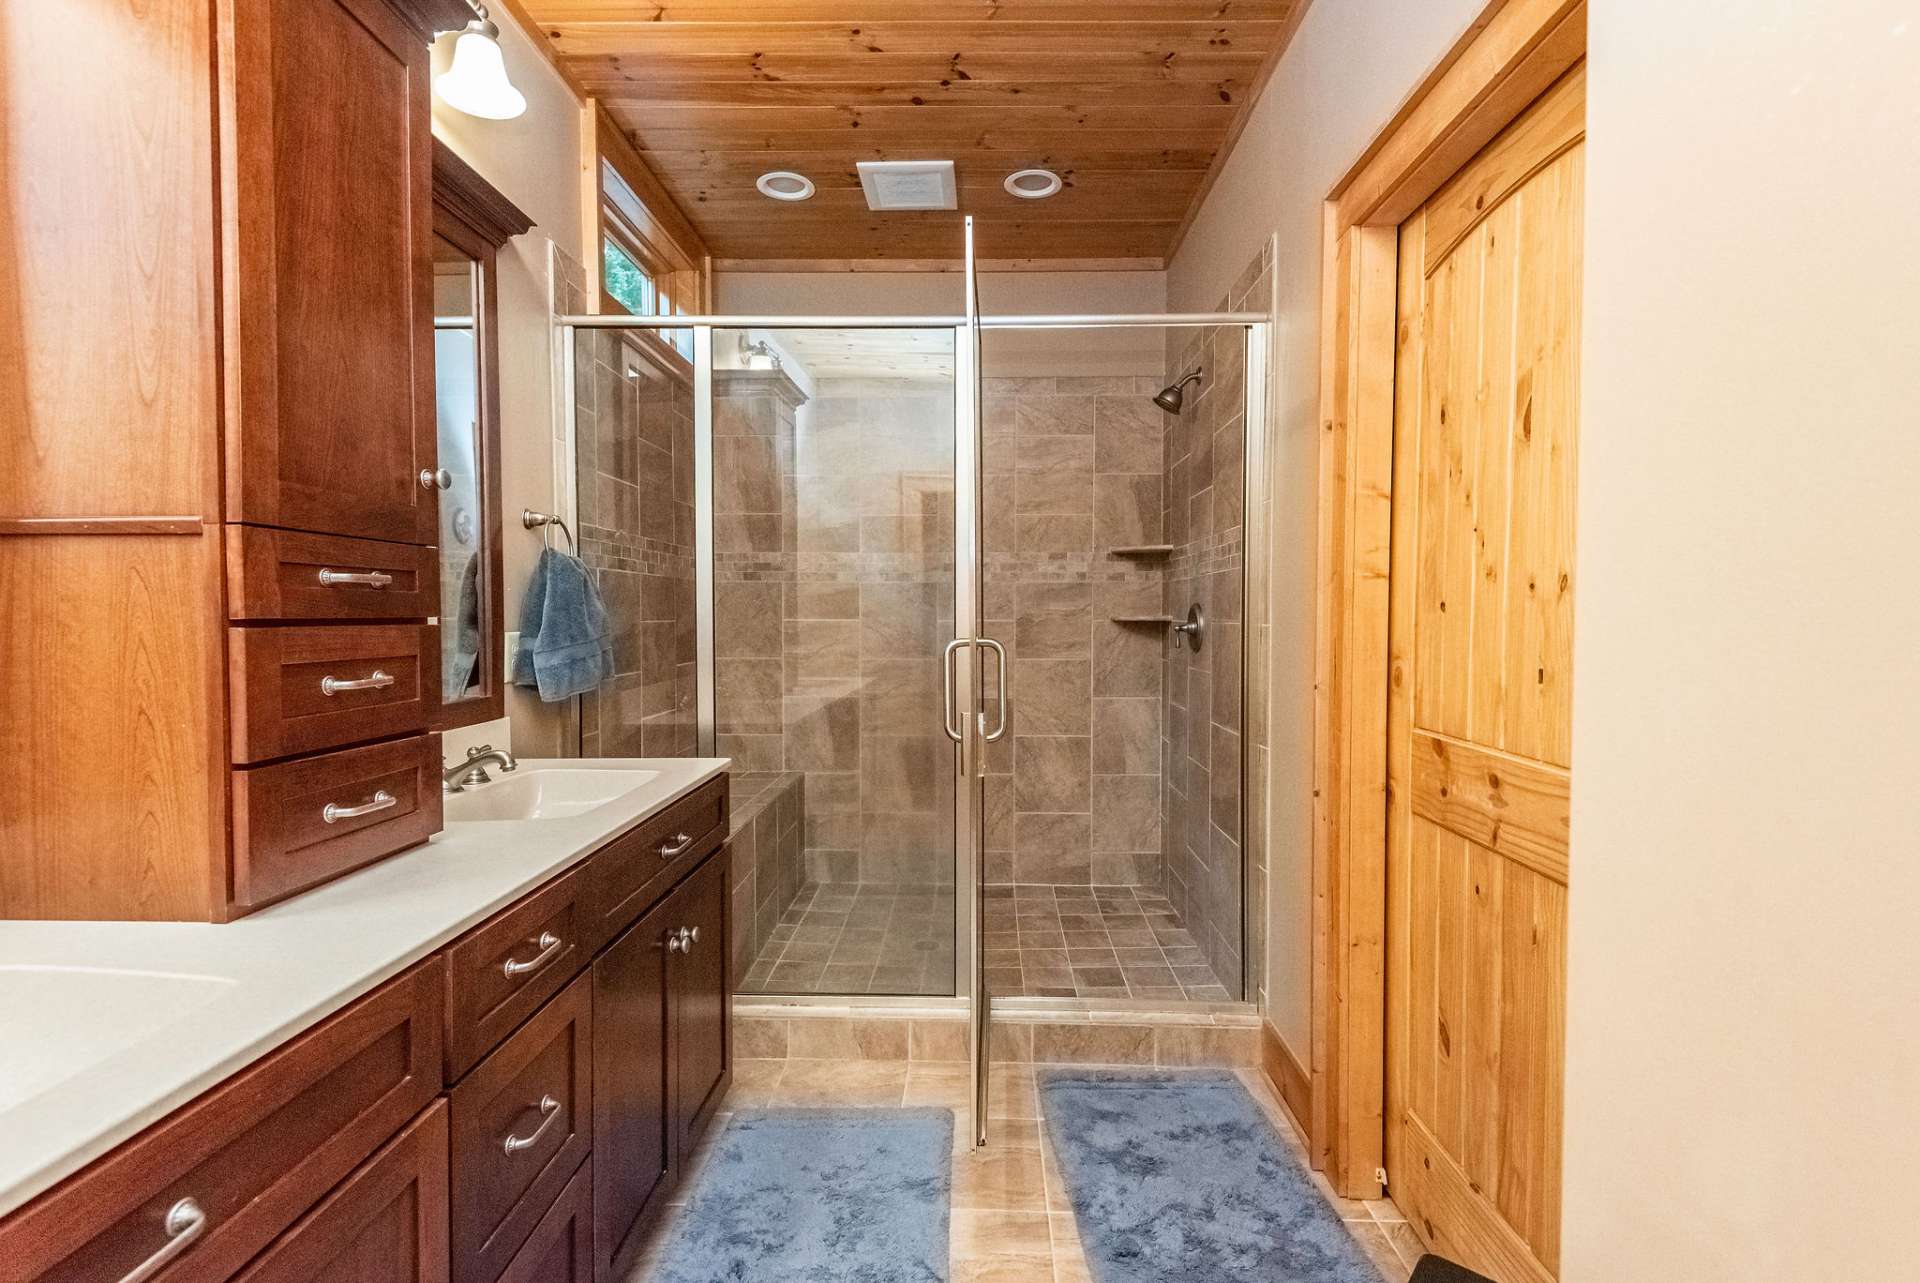 Private master bath with double sinks and an additional closet.